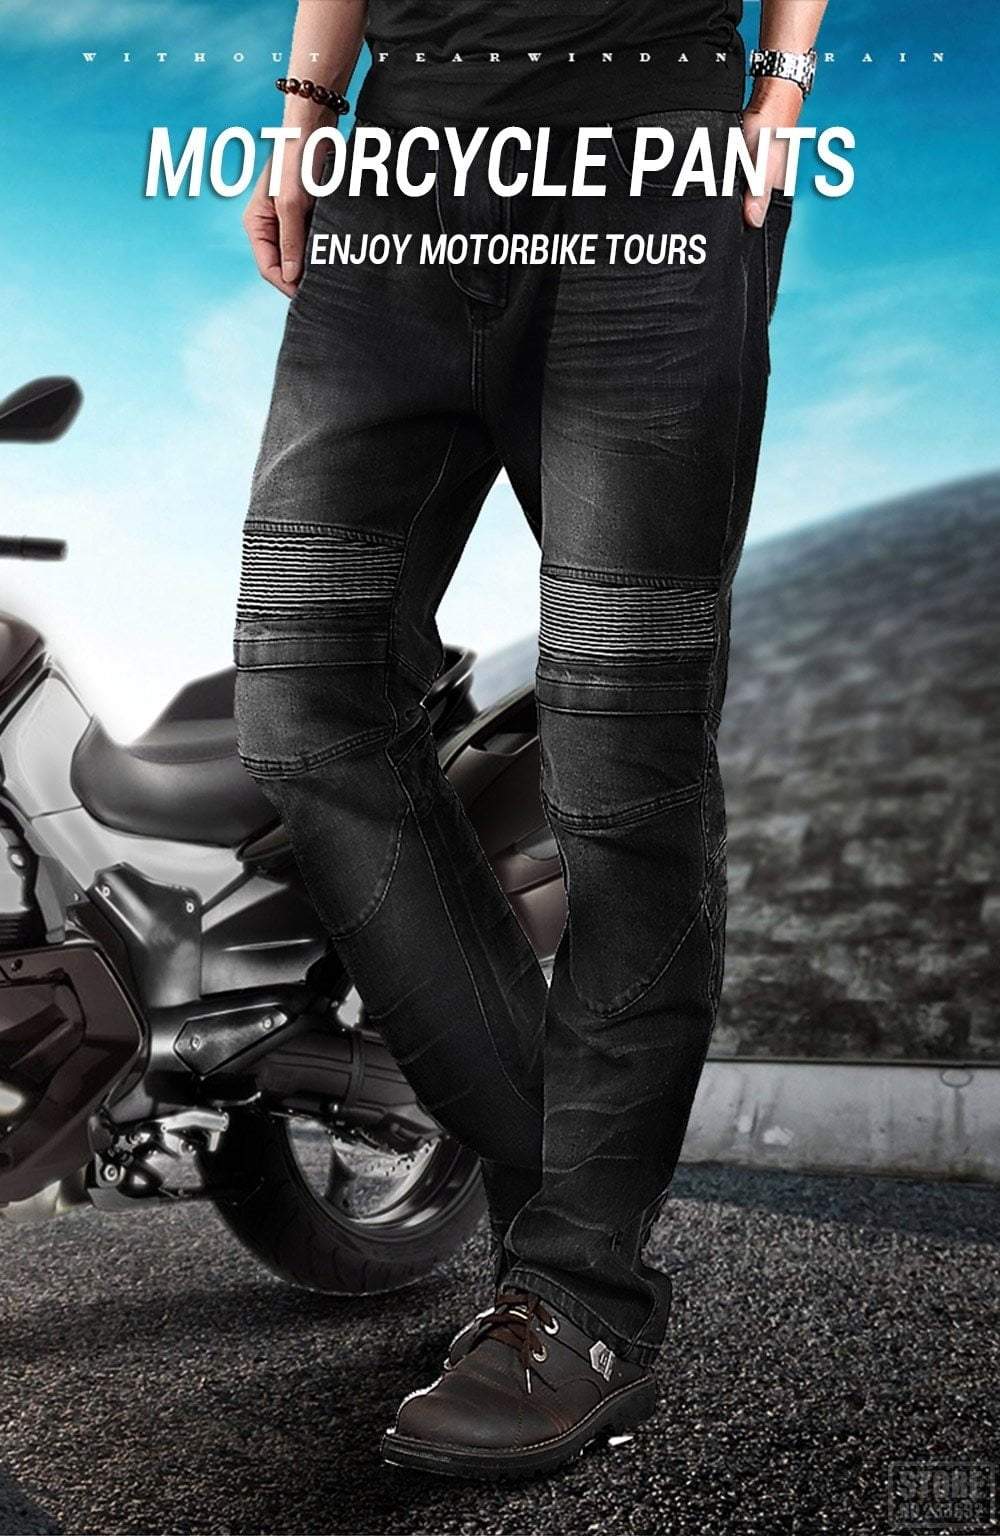 THE BEST MOTORCYCLE PANTS FOR TOURING - Rugged Motorbike Jeans